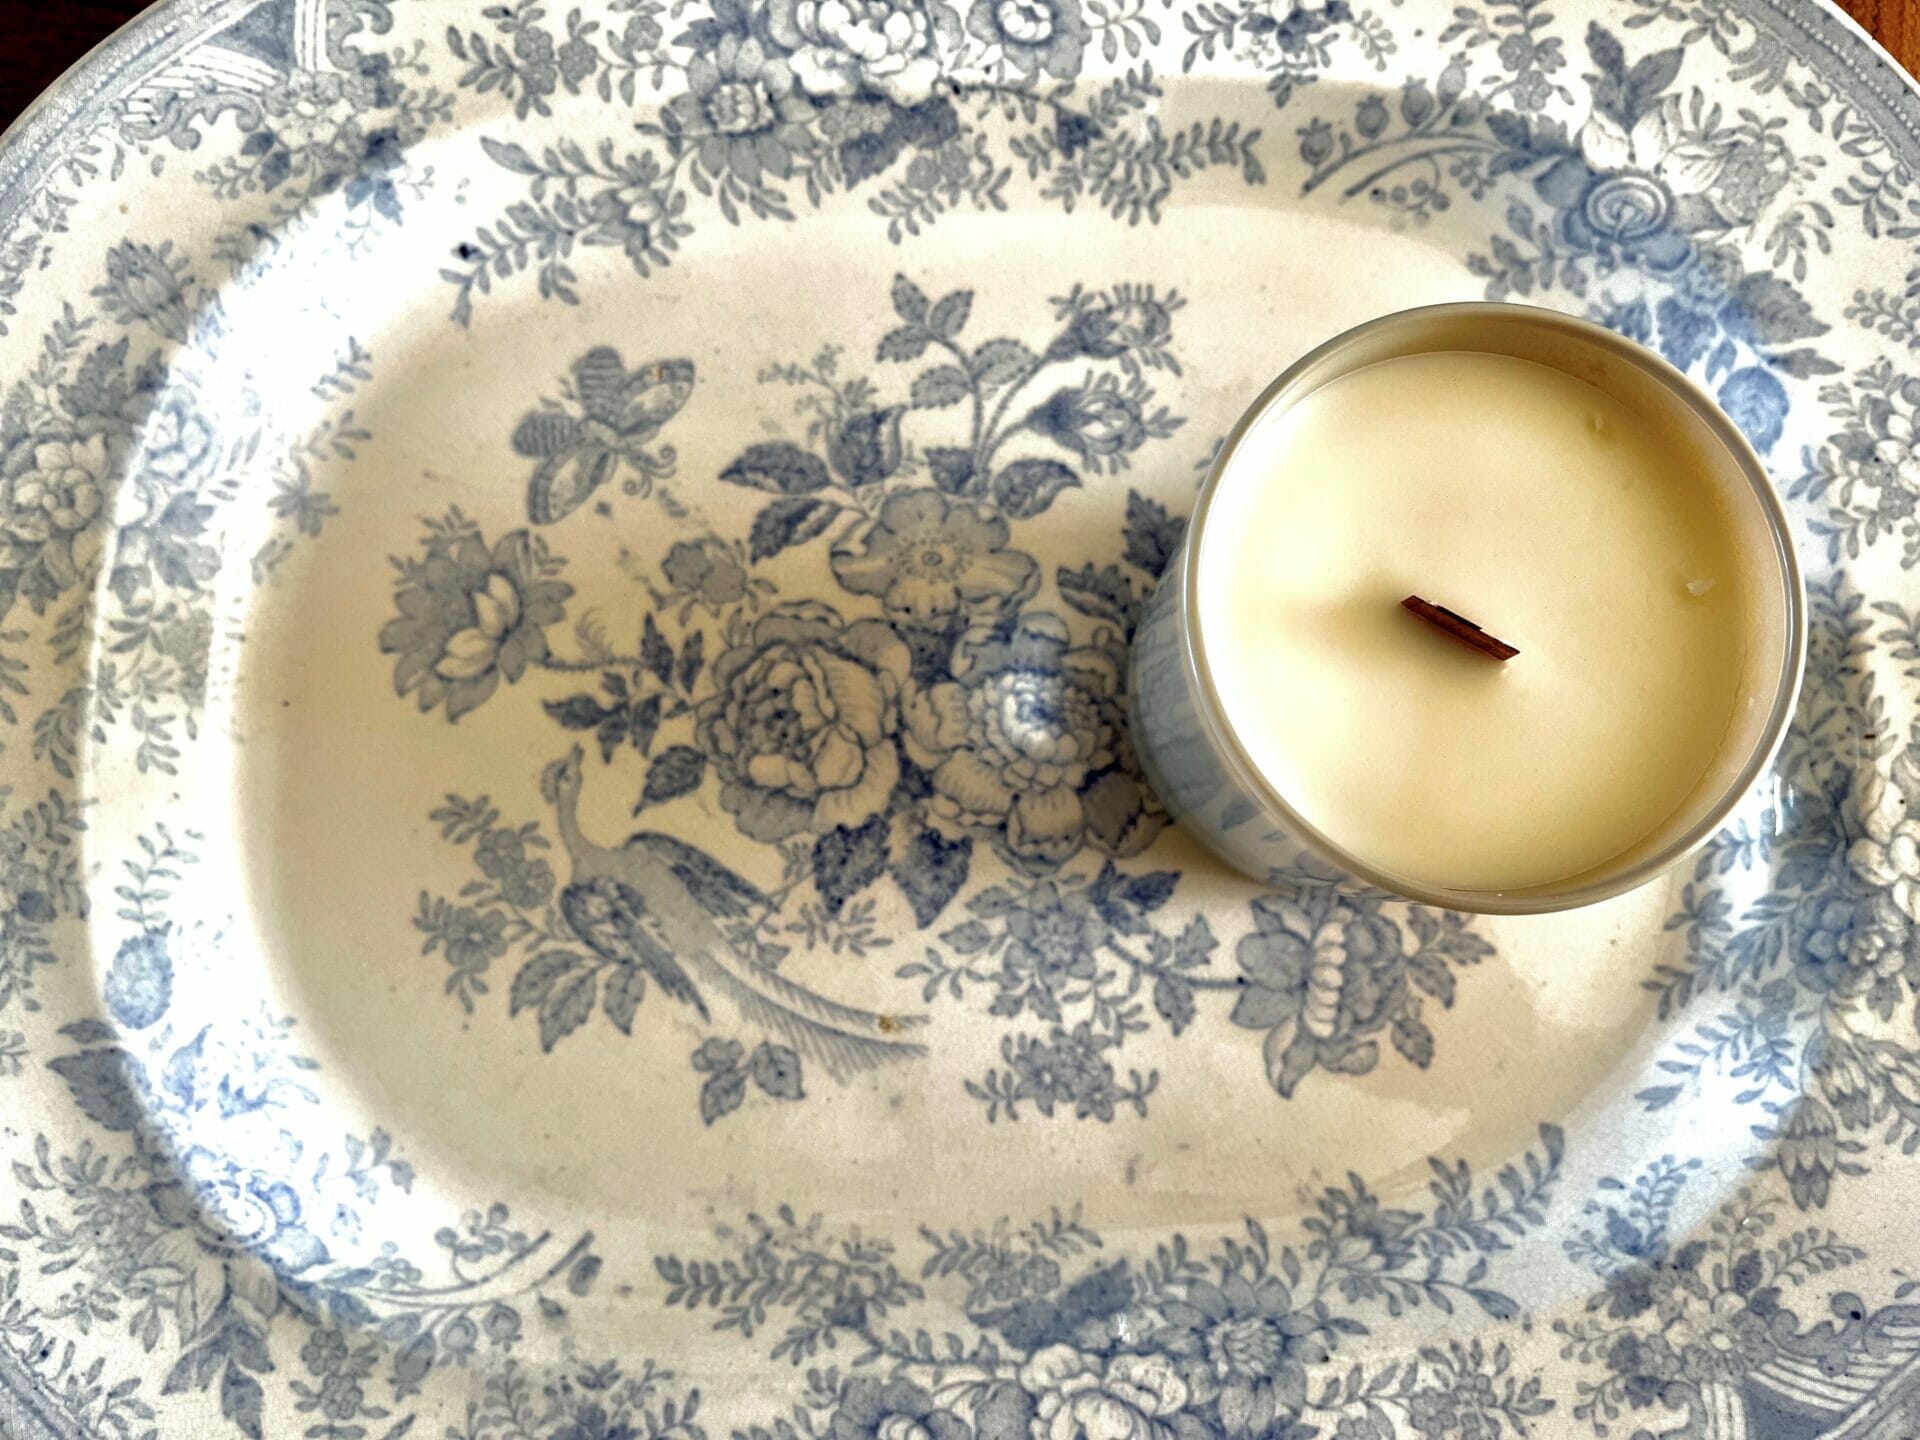 Unlit candle on old blue and white plate